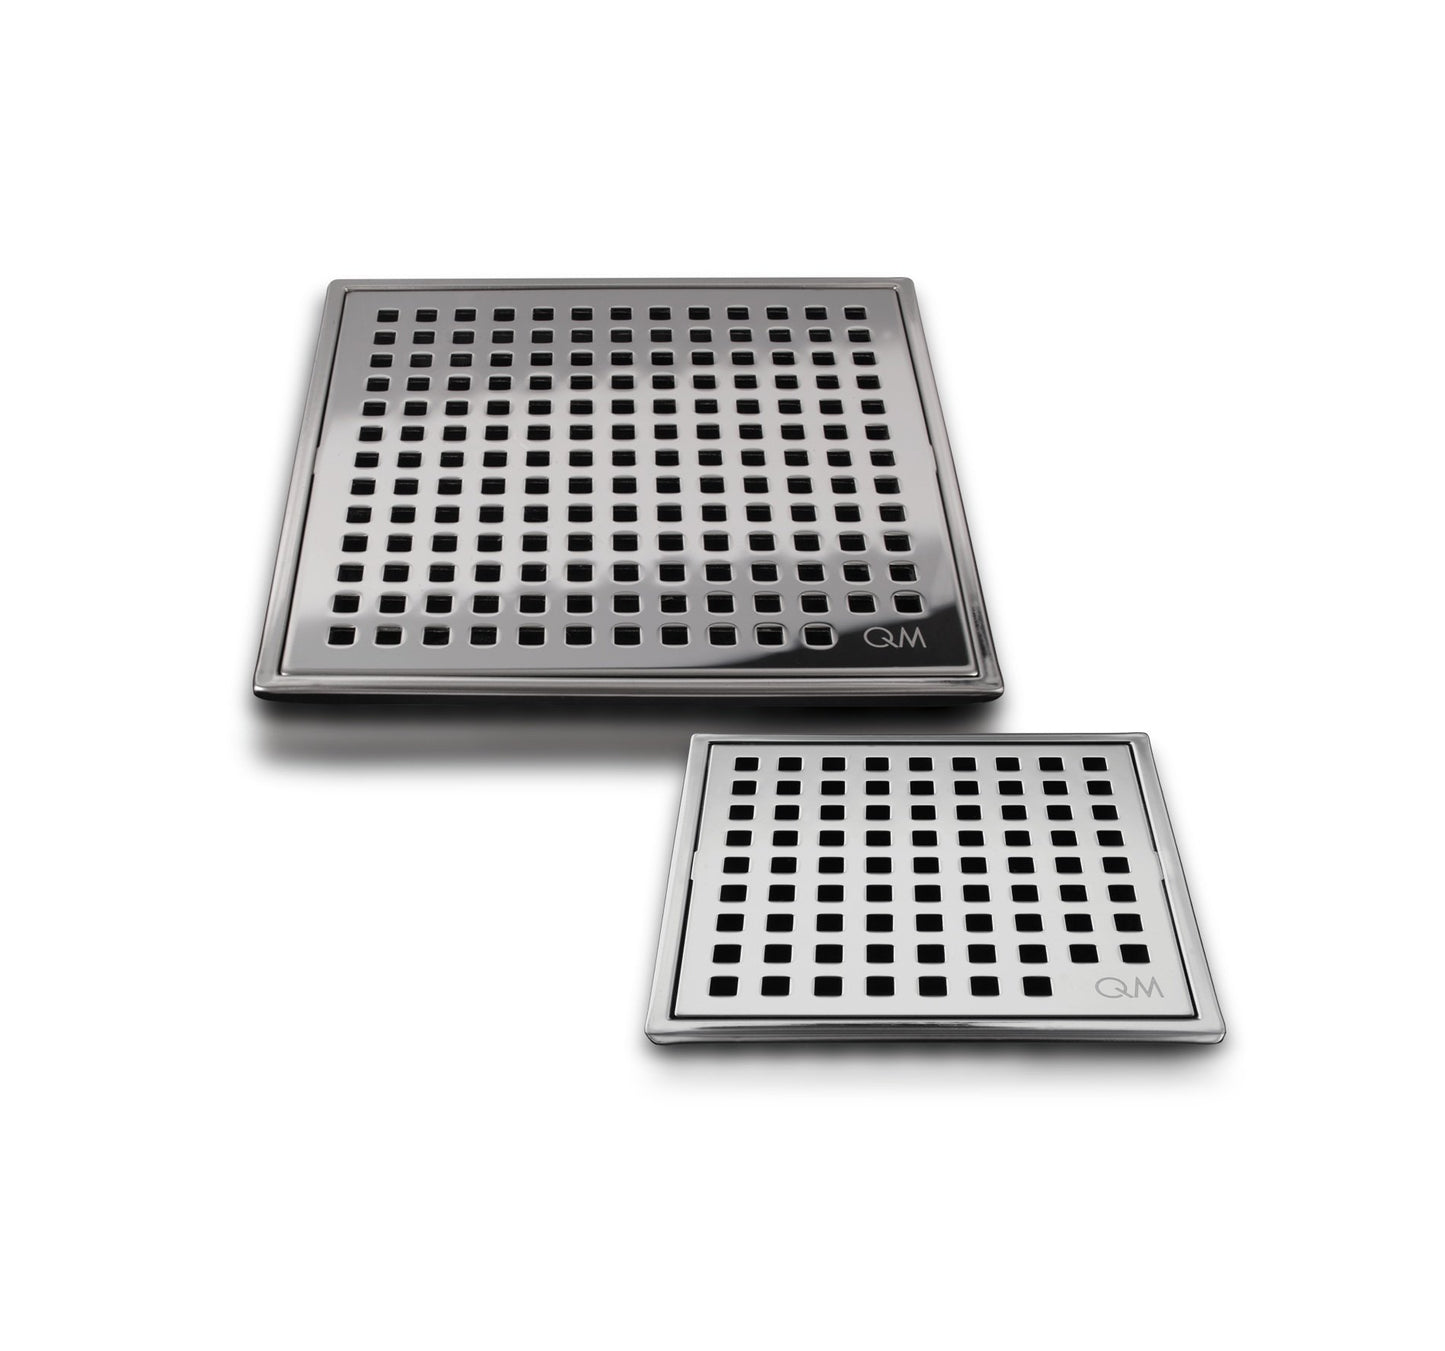 QM Square Shower Drain, Grate made of Stainless Steel Marine 316 and Base made of ABS, Lagos Series Mira Line, 5 inch 3/4, Polished Finish, Kit includes Hair Trap/Strainer and Key